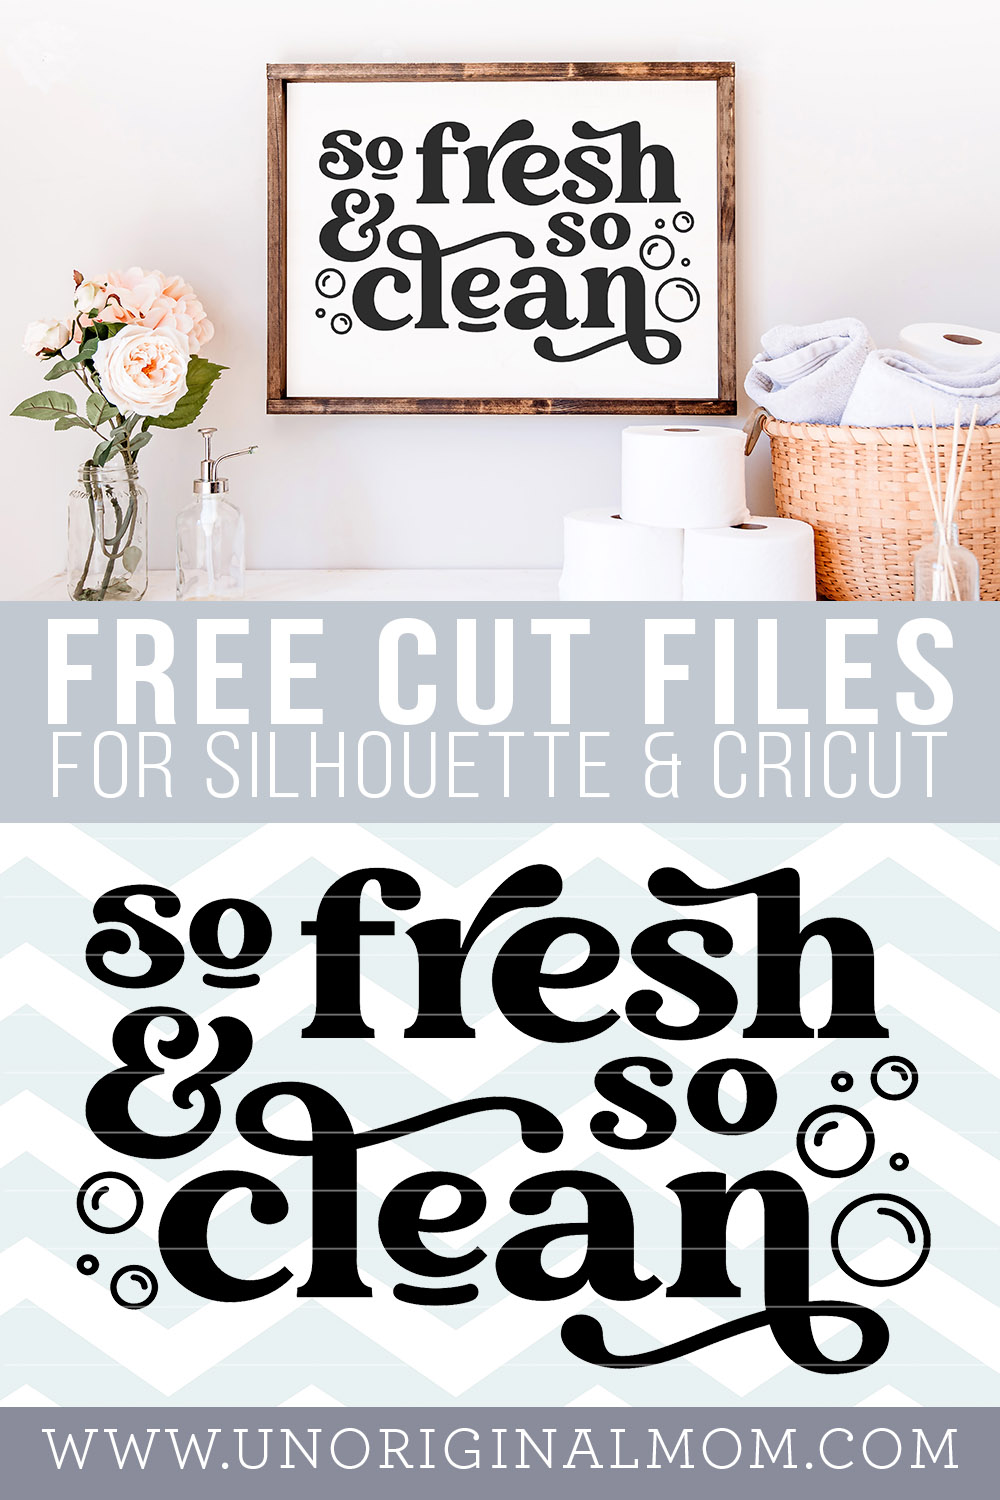 So Fresh and So Clean - free SVG for Cricut and Silhouette. Perfect DIY bathroom sign for a half bathroom or kids bathroom.